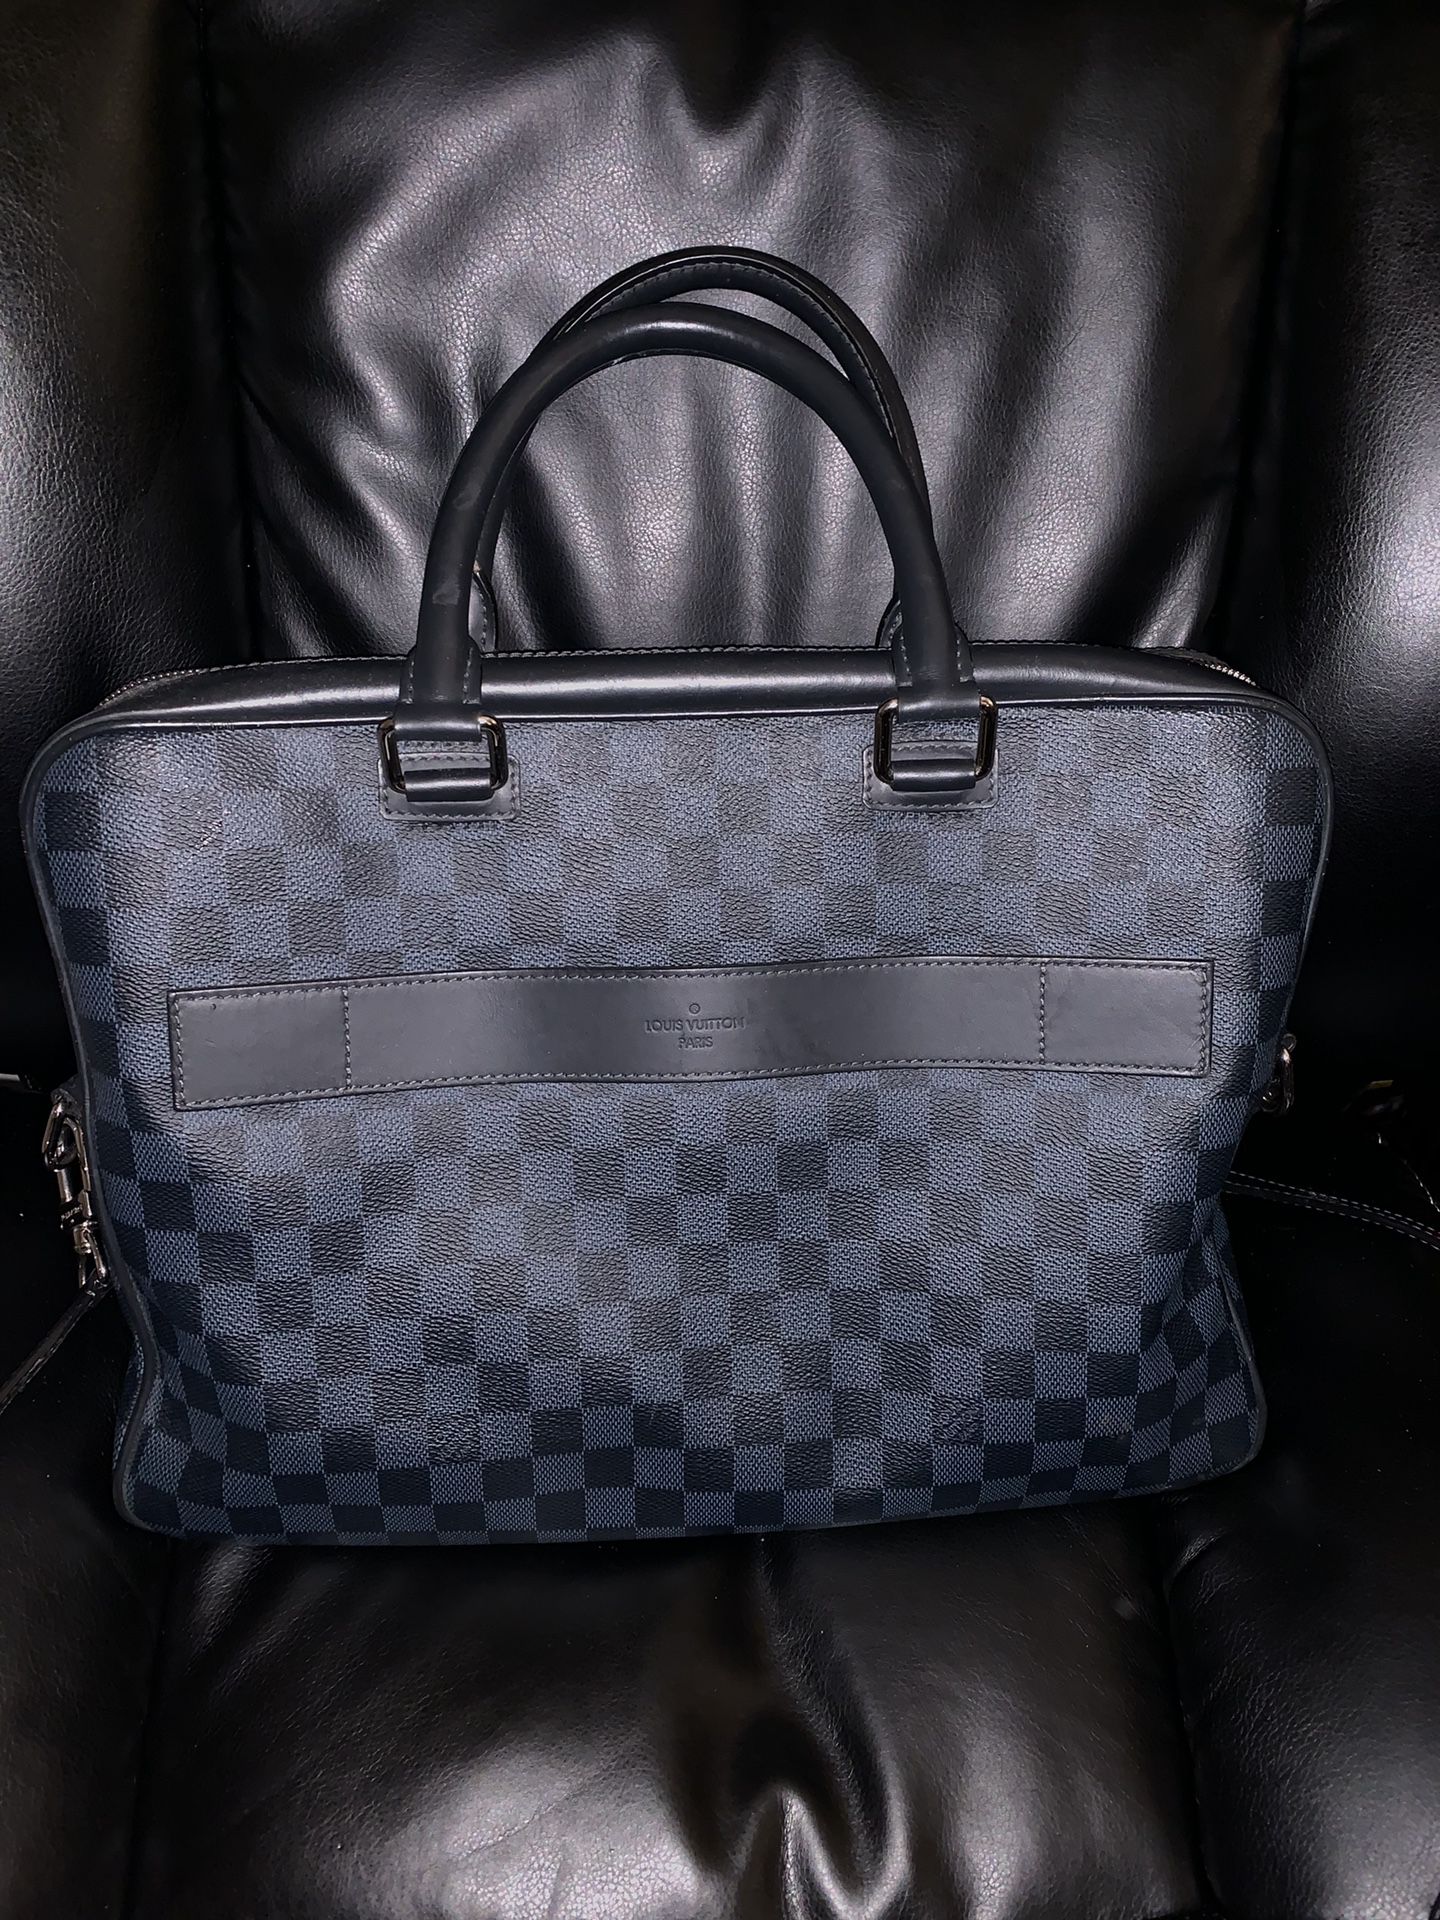 Authentic Men's Louis Vuitton bag for Sale in Rancho Cucamonga